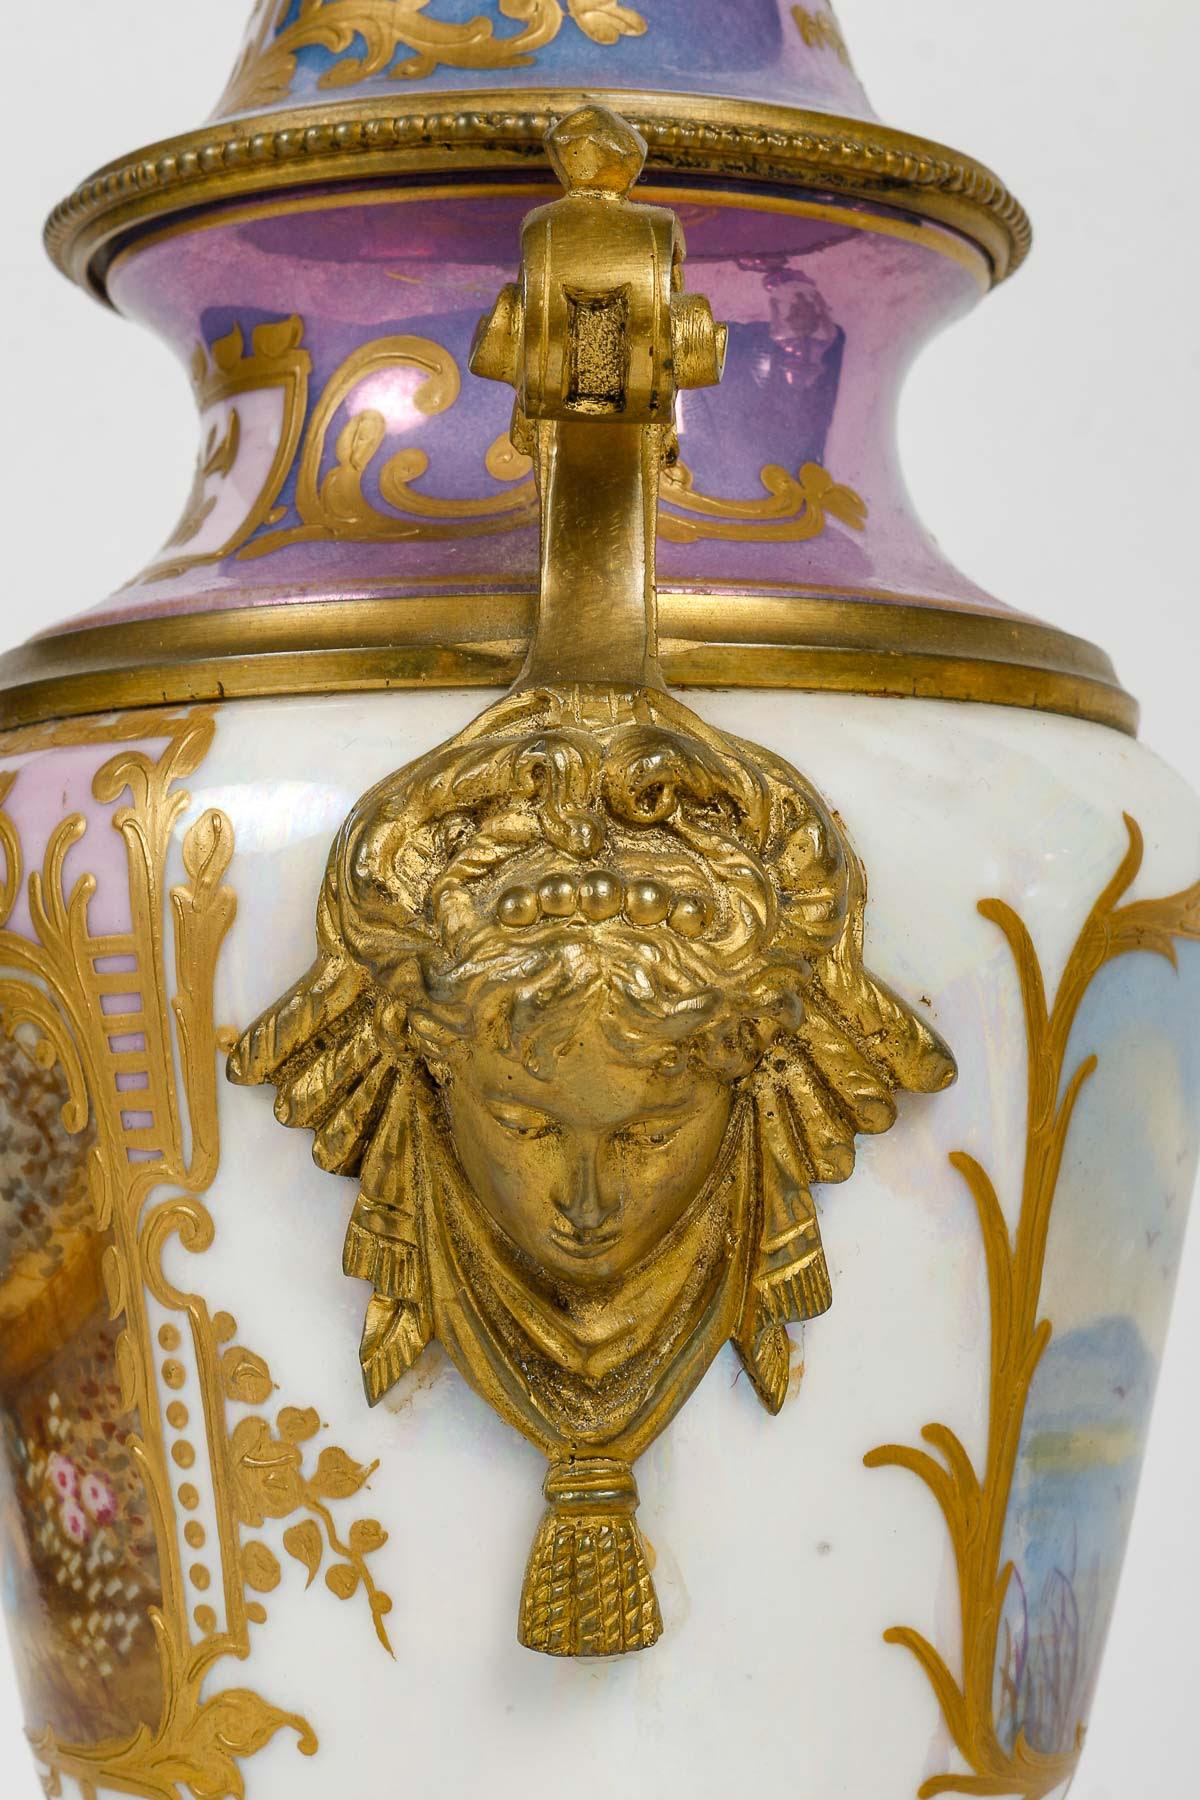 Pair of Iridescent Sèvres Porcelain and Gilt Bronze Covered Vases, 19th Century. 2